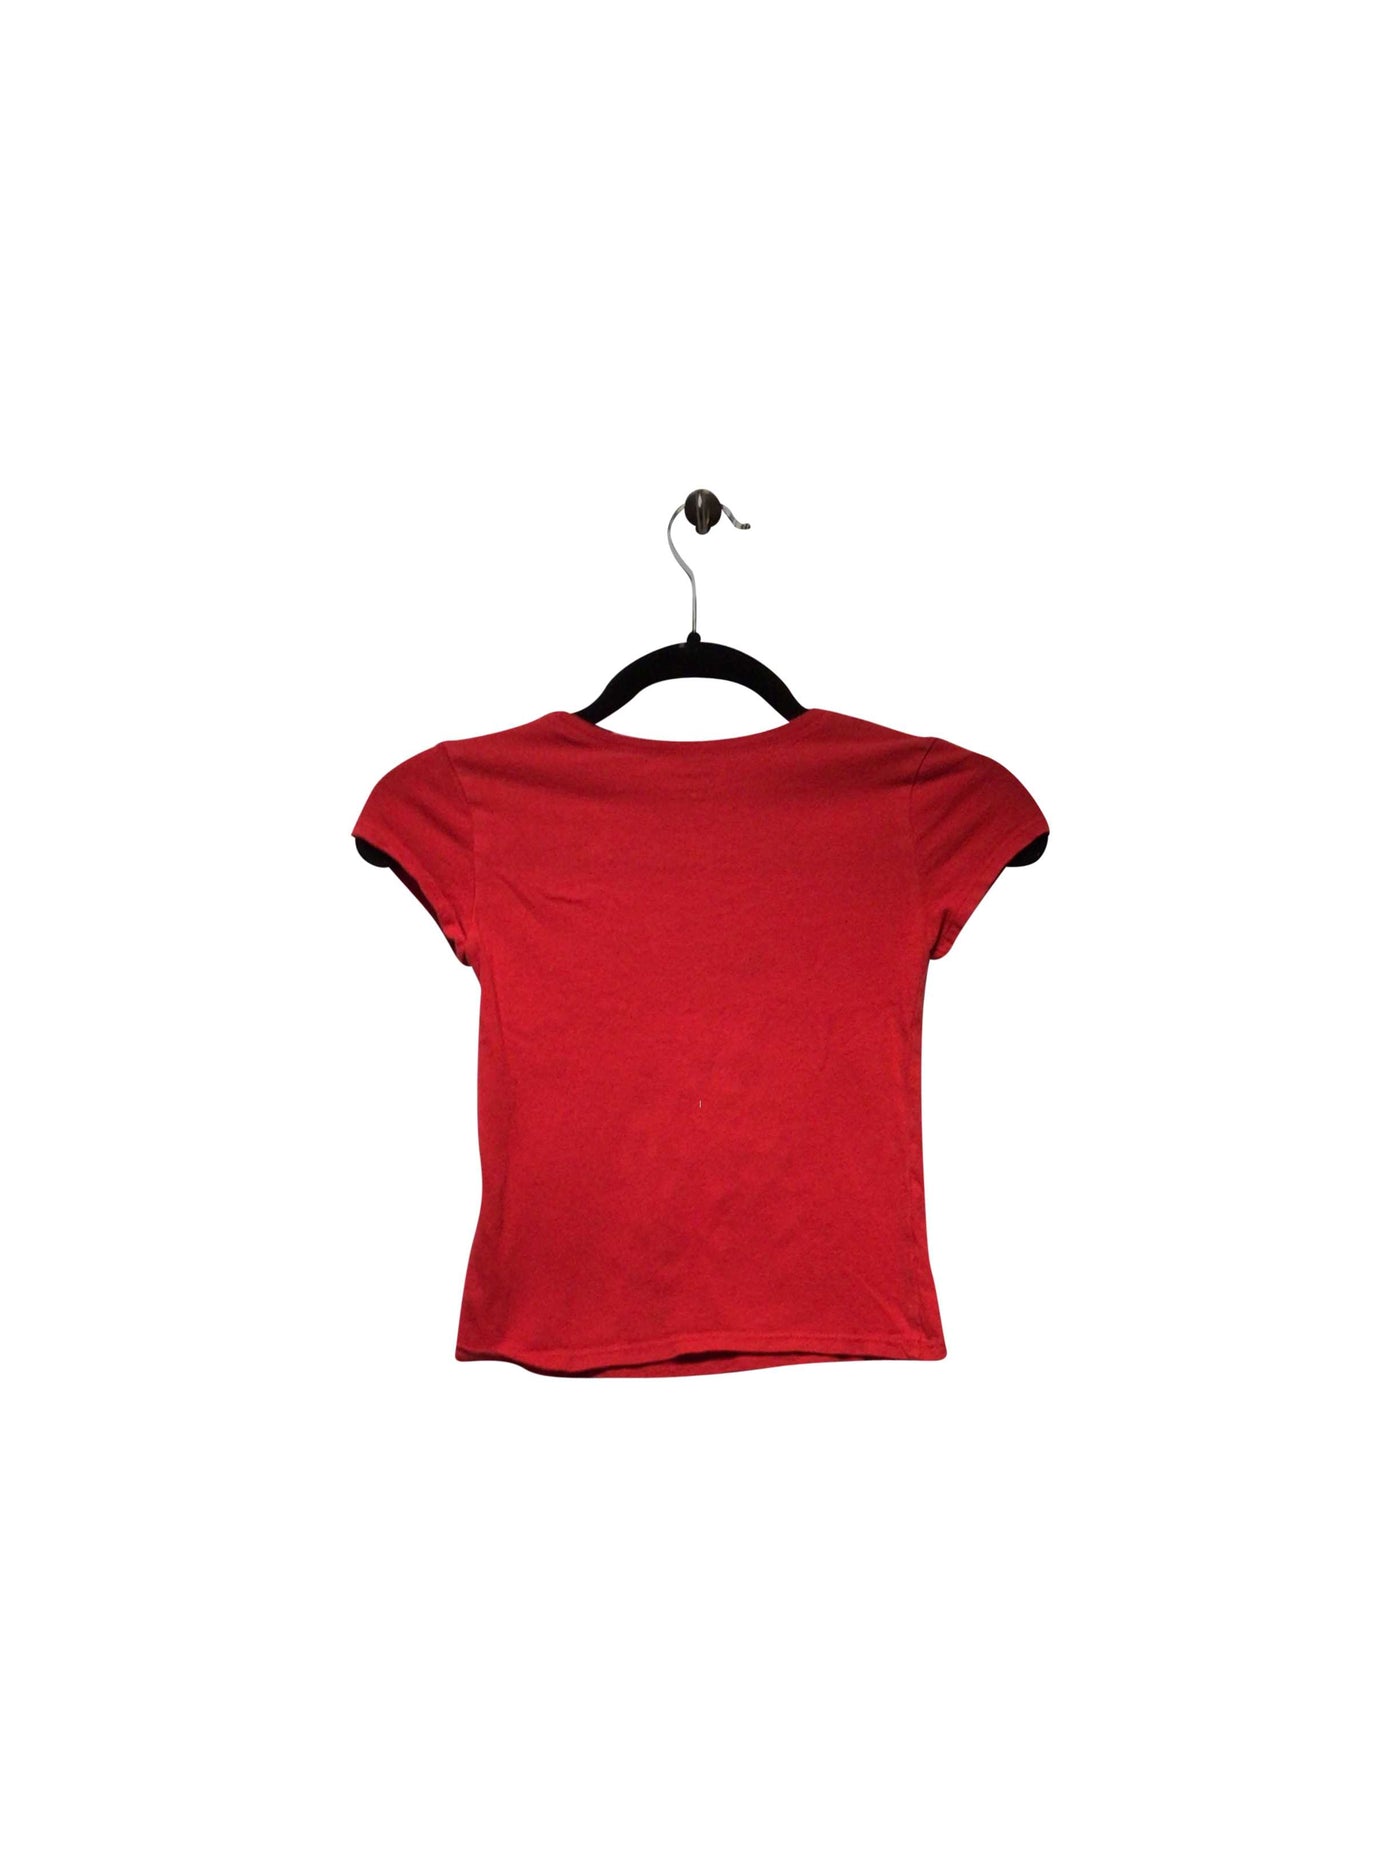 THE CHILDREN'S PLACE Regular fit T-shirt in Red  -  S  14.19 Koop